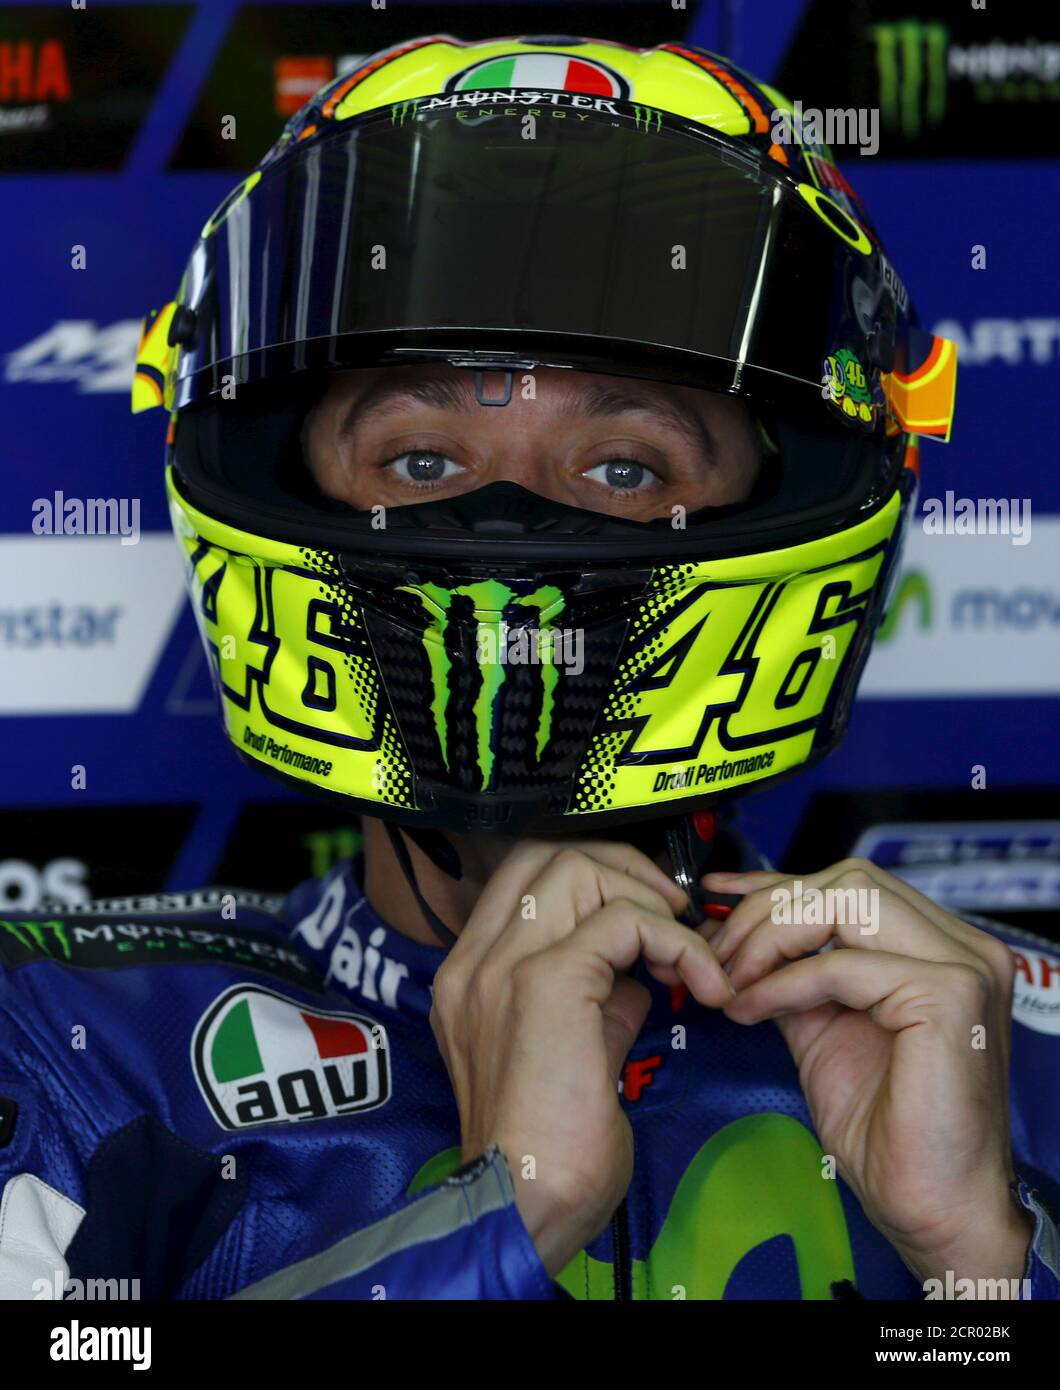 Dekan grænse Nyttig Yamaha MotoGP rider Valentino Rossi of Italy puts his helmet on in his box  before the start the first free practice session of the Aragon Motorcycling  Grand Prix at Motorland race track